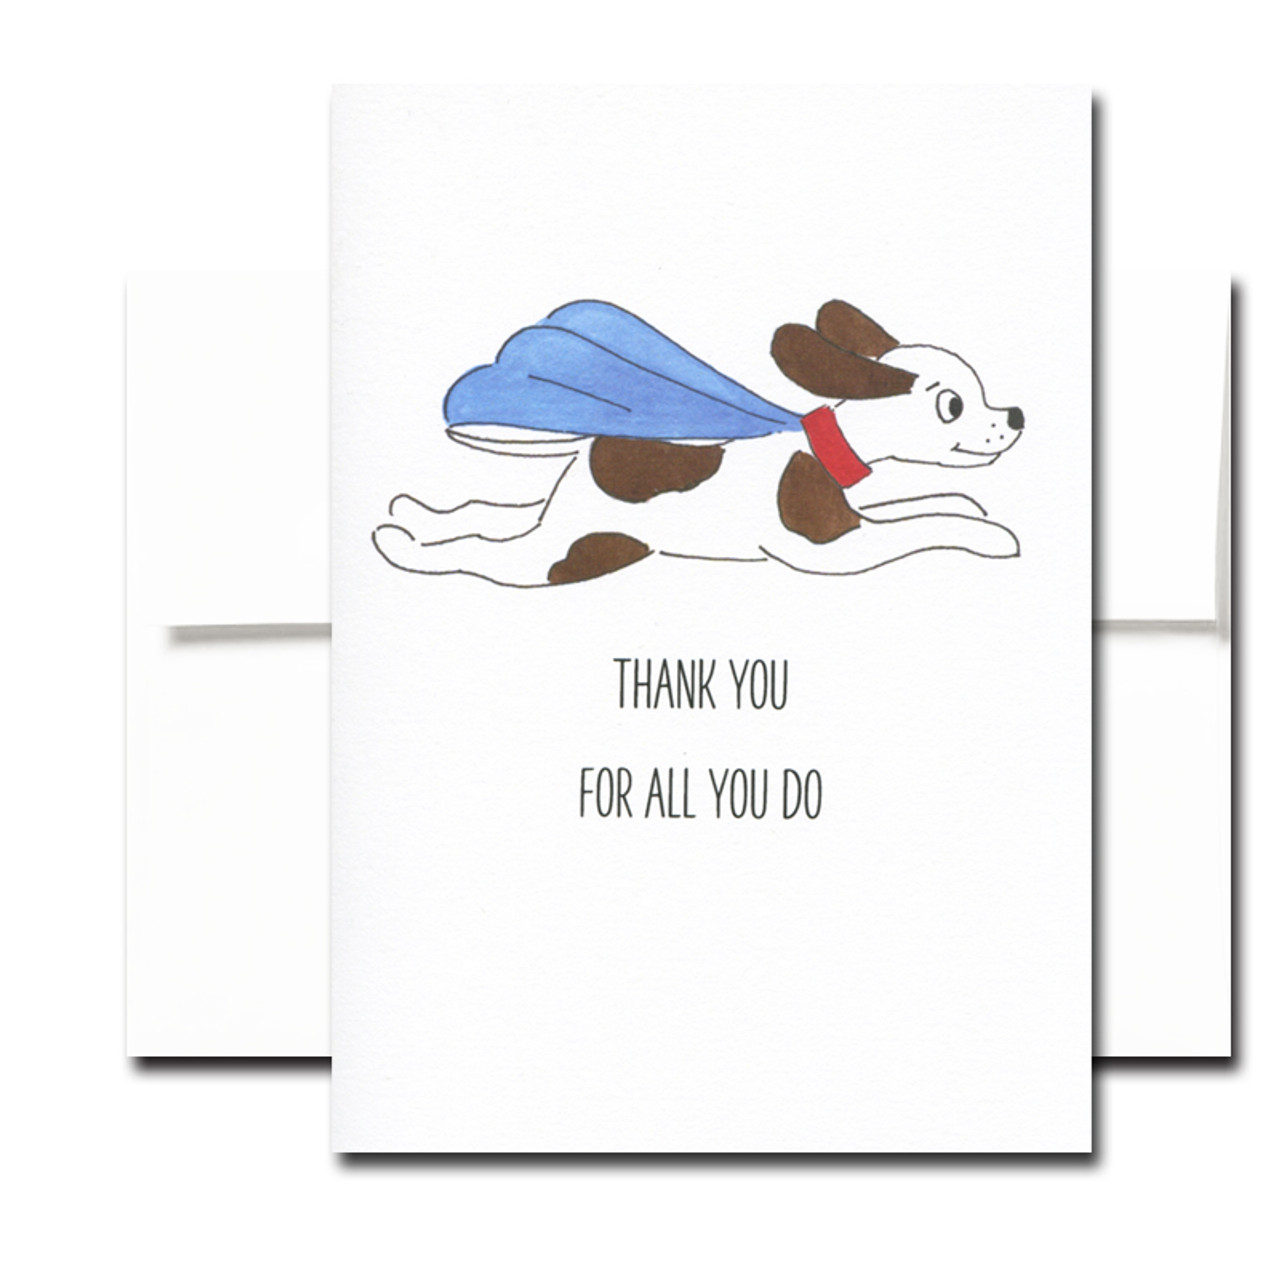 Superhero Thank You Note Card features little flying dog with blue cape